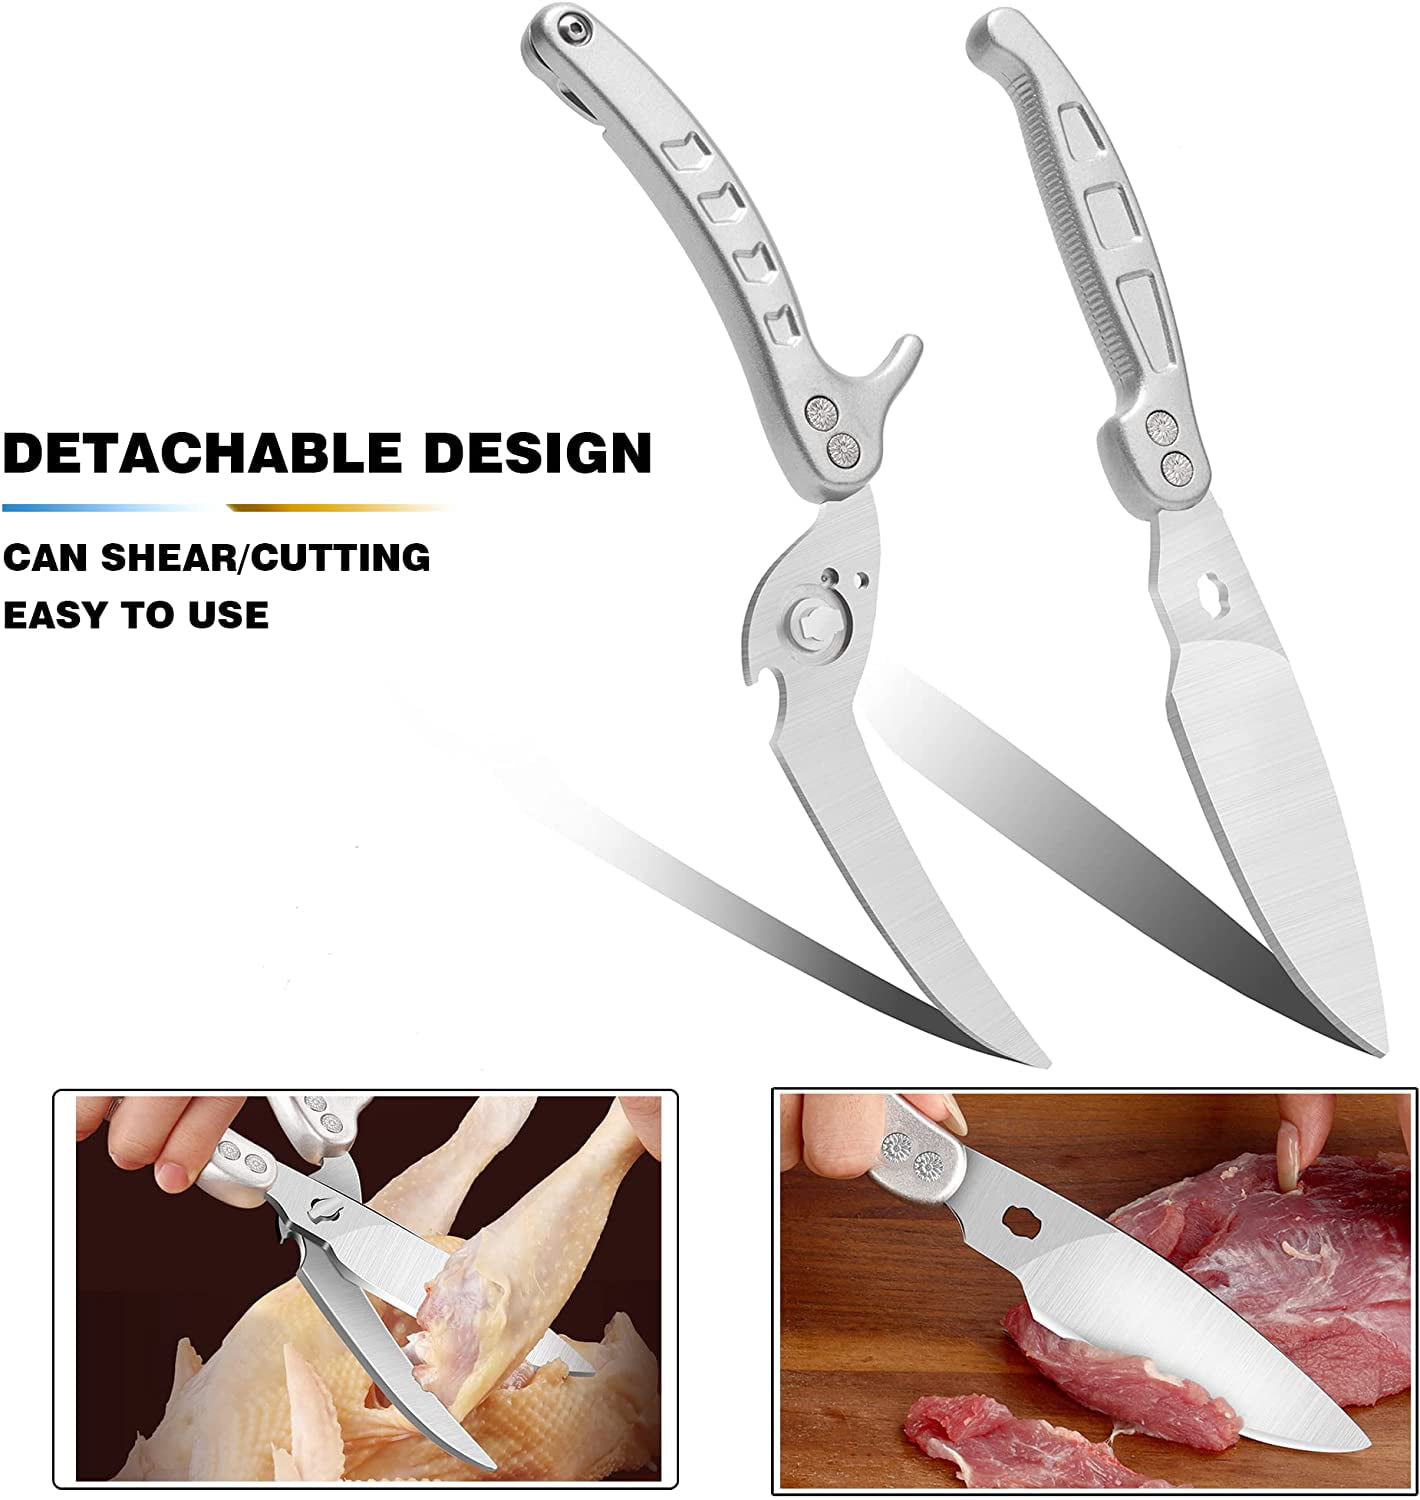 Come Apart Kitchen Shears by WELLSTAR, Multi-purpose Heavy Duty German  Stainless Steel Food Scissors for Cutting Meat Poultry Chicken Vegetable